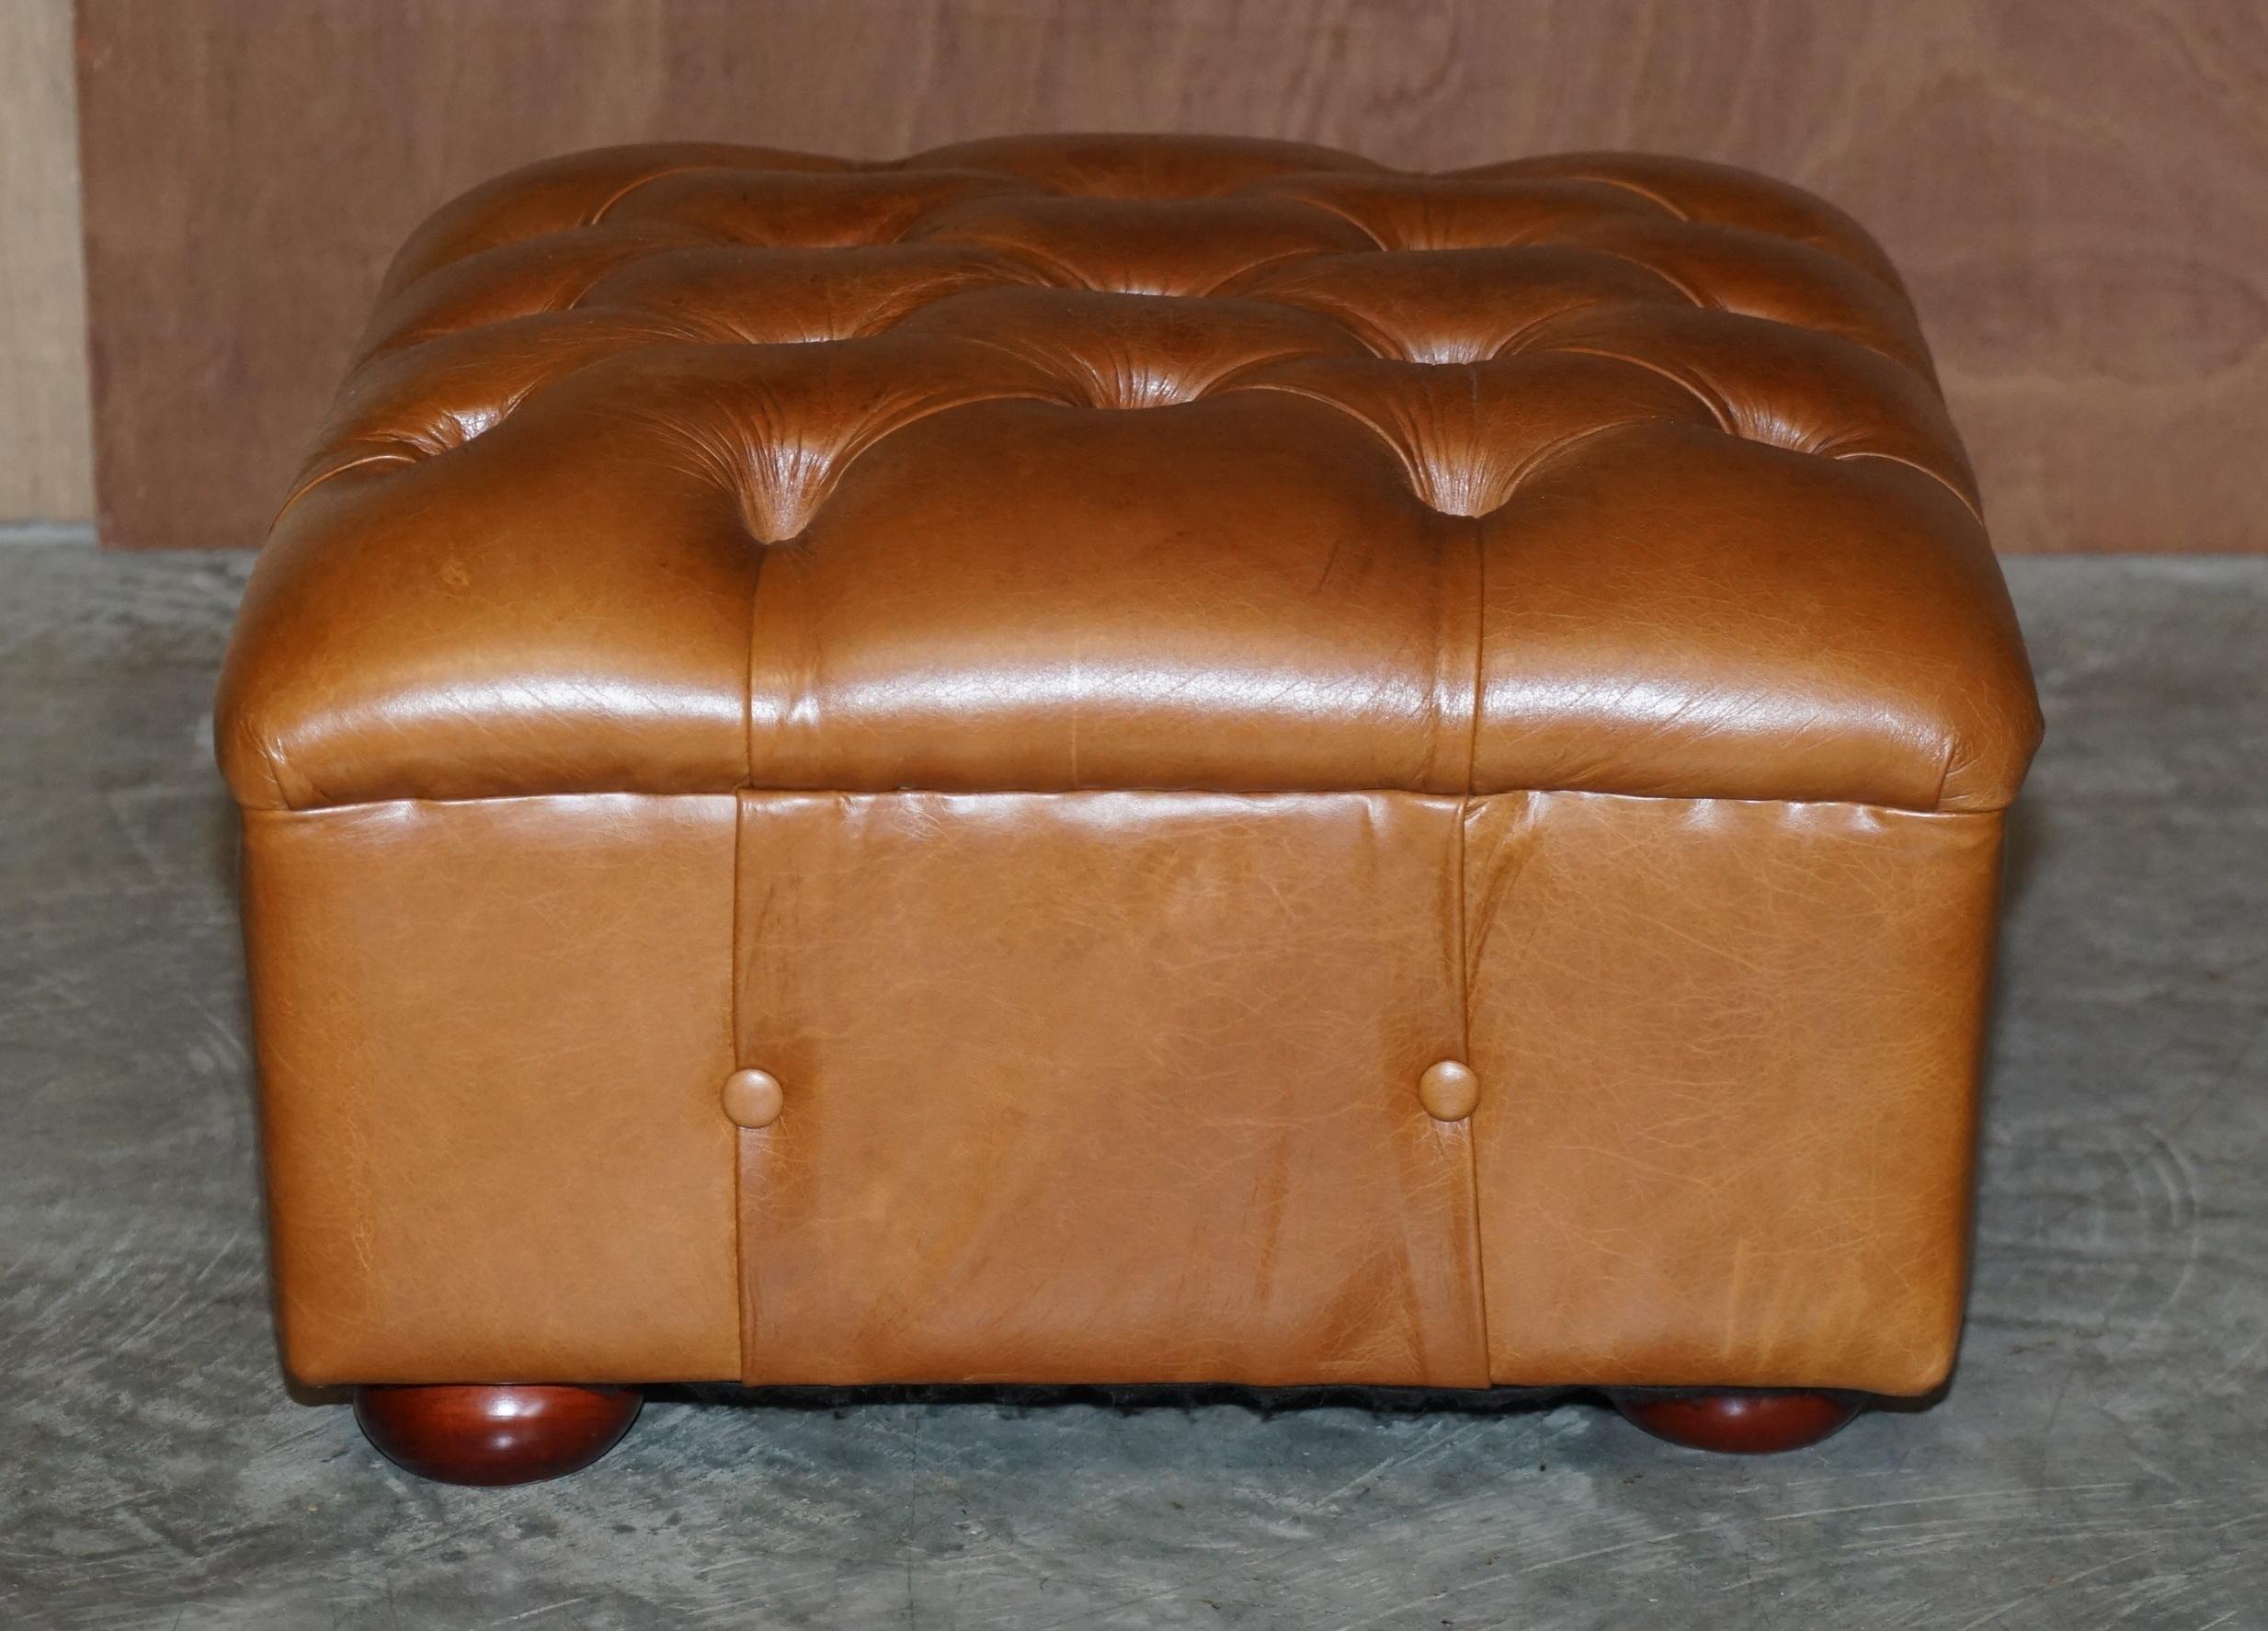 20th Century Chesterfield Brown Leather Tufted Square Footstool Vintage Biker Tan Leather For Sale